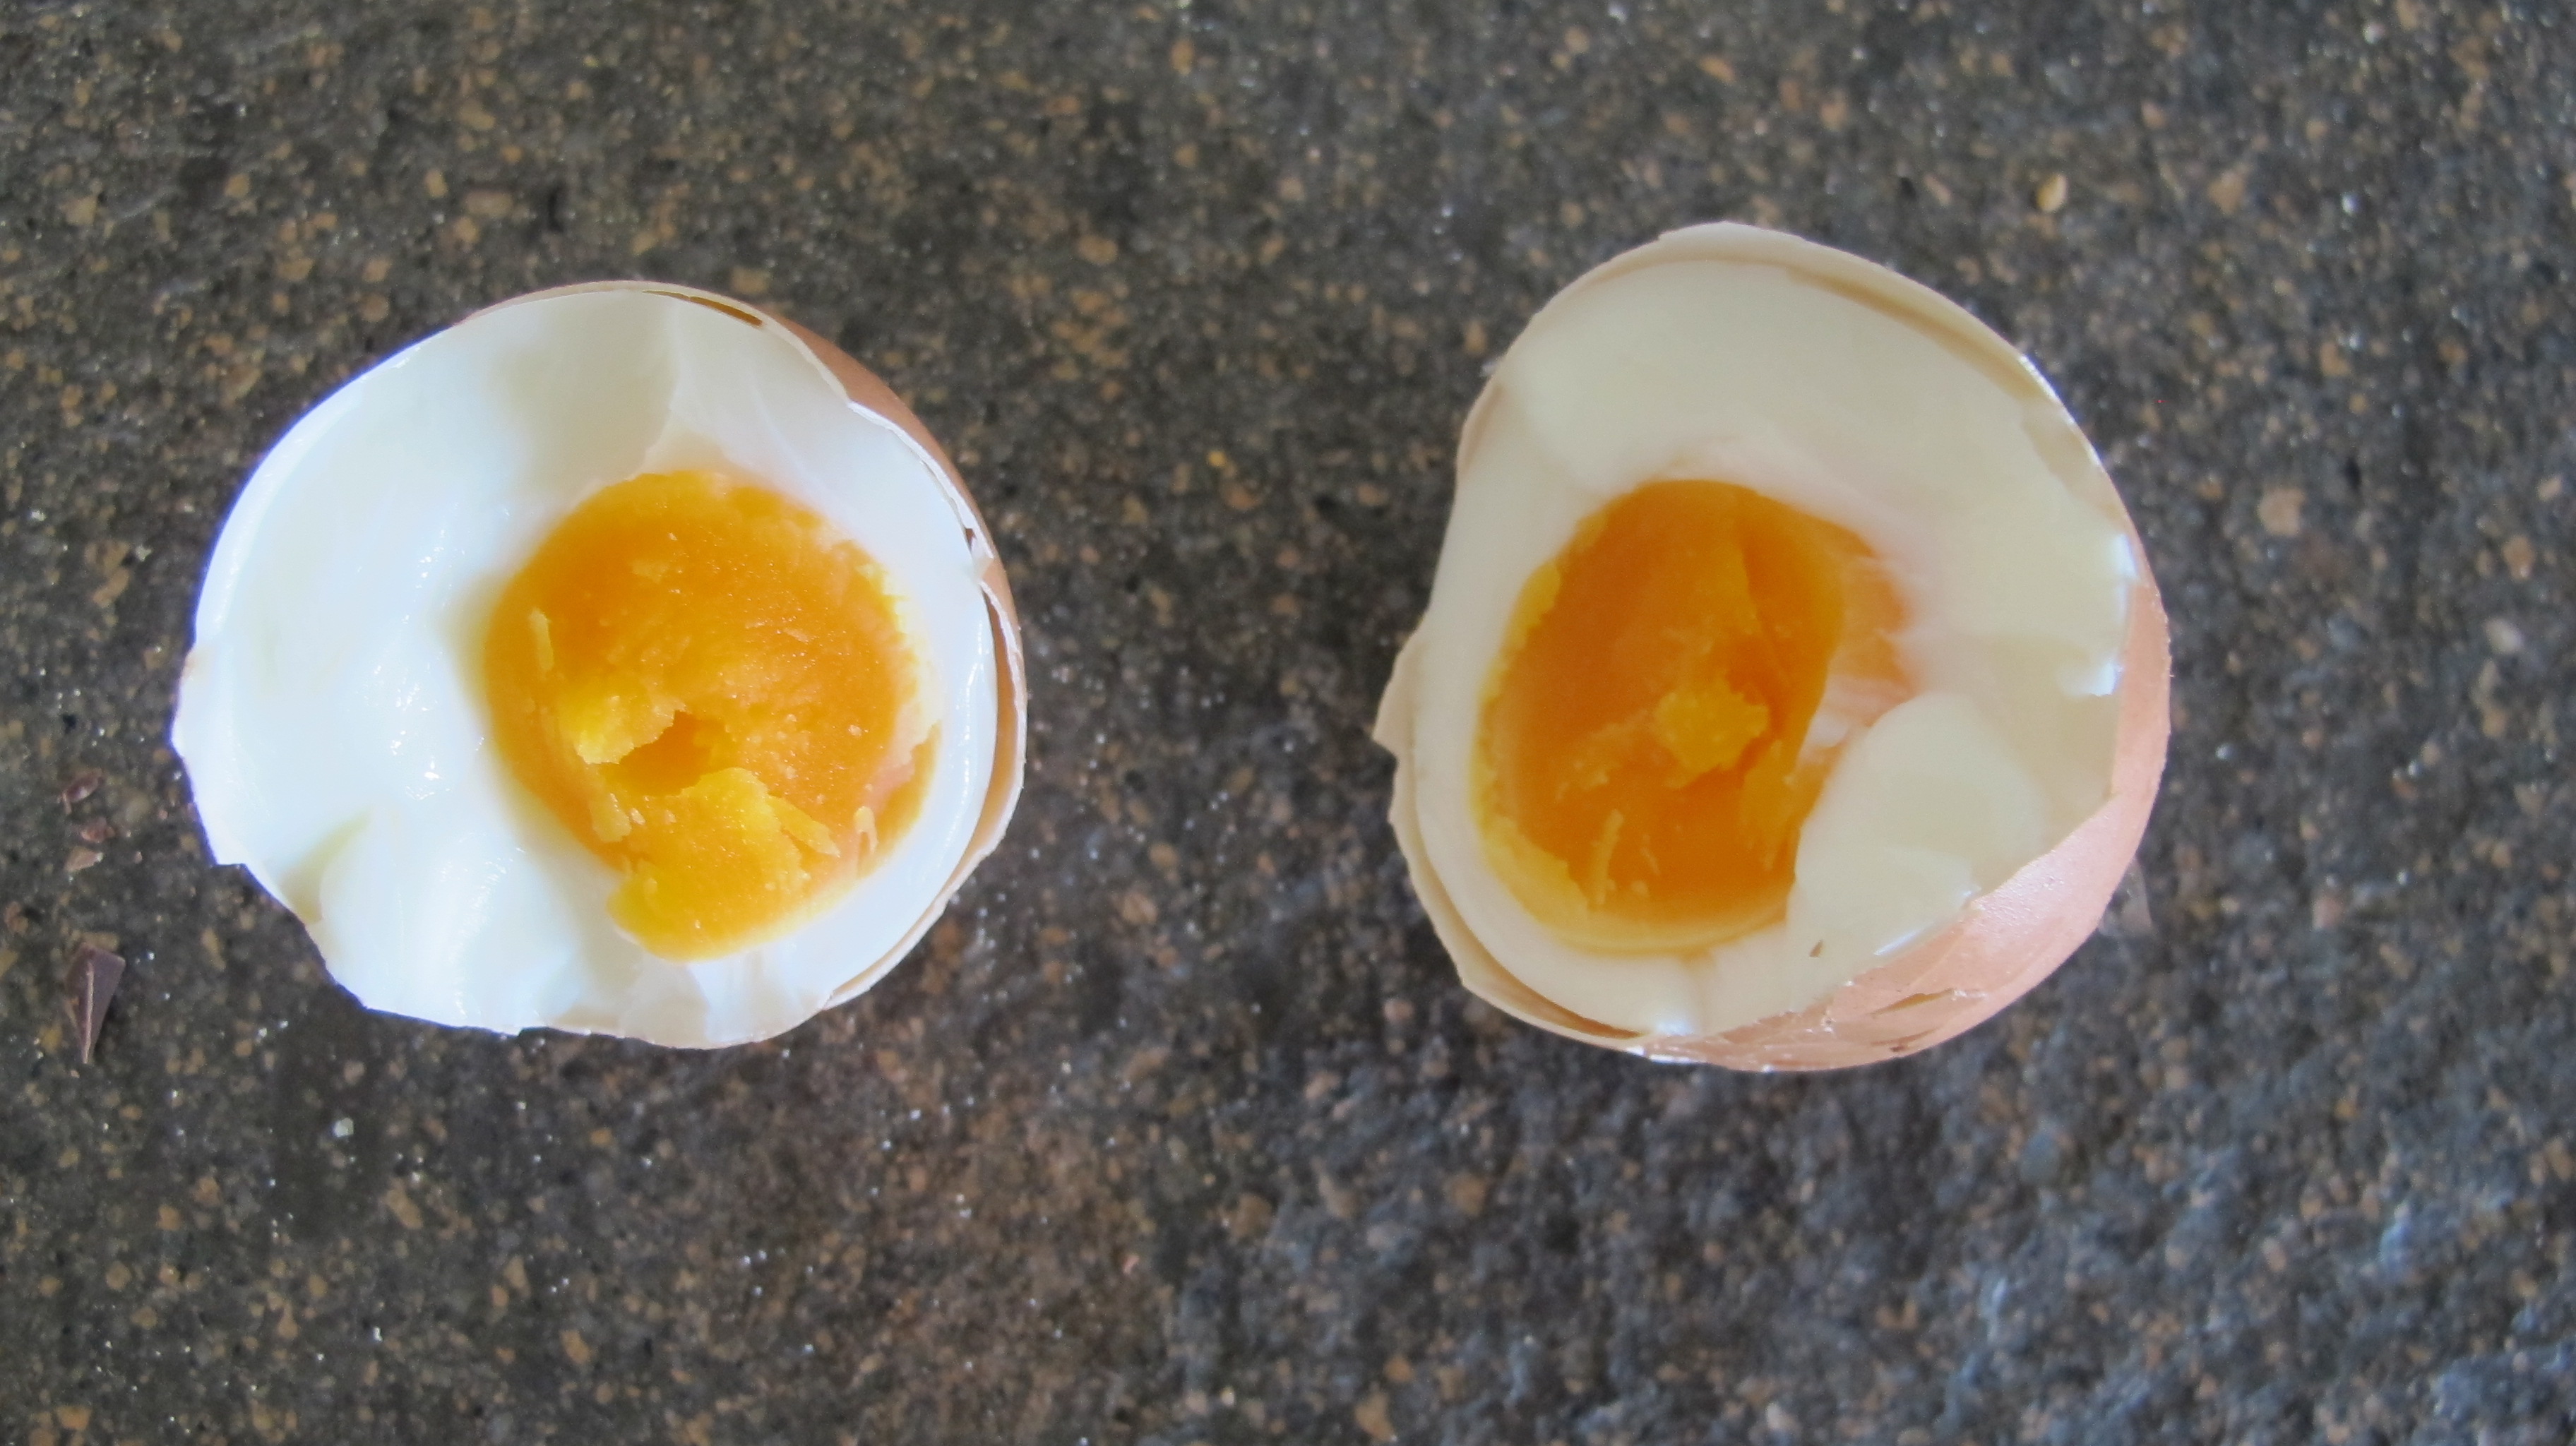 Take a look at the orange of that yolk. 